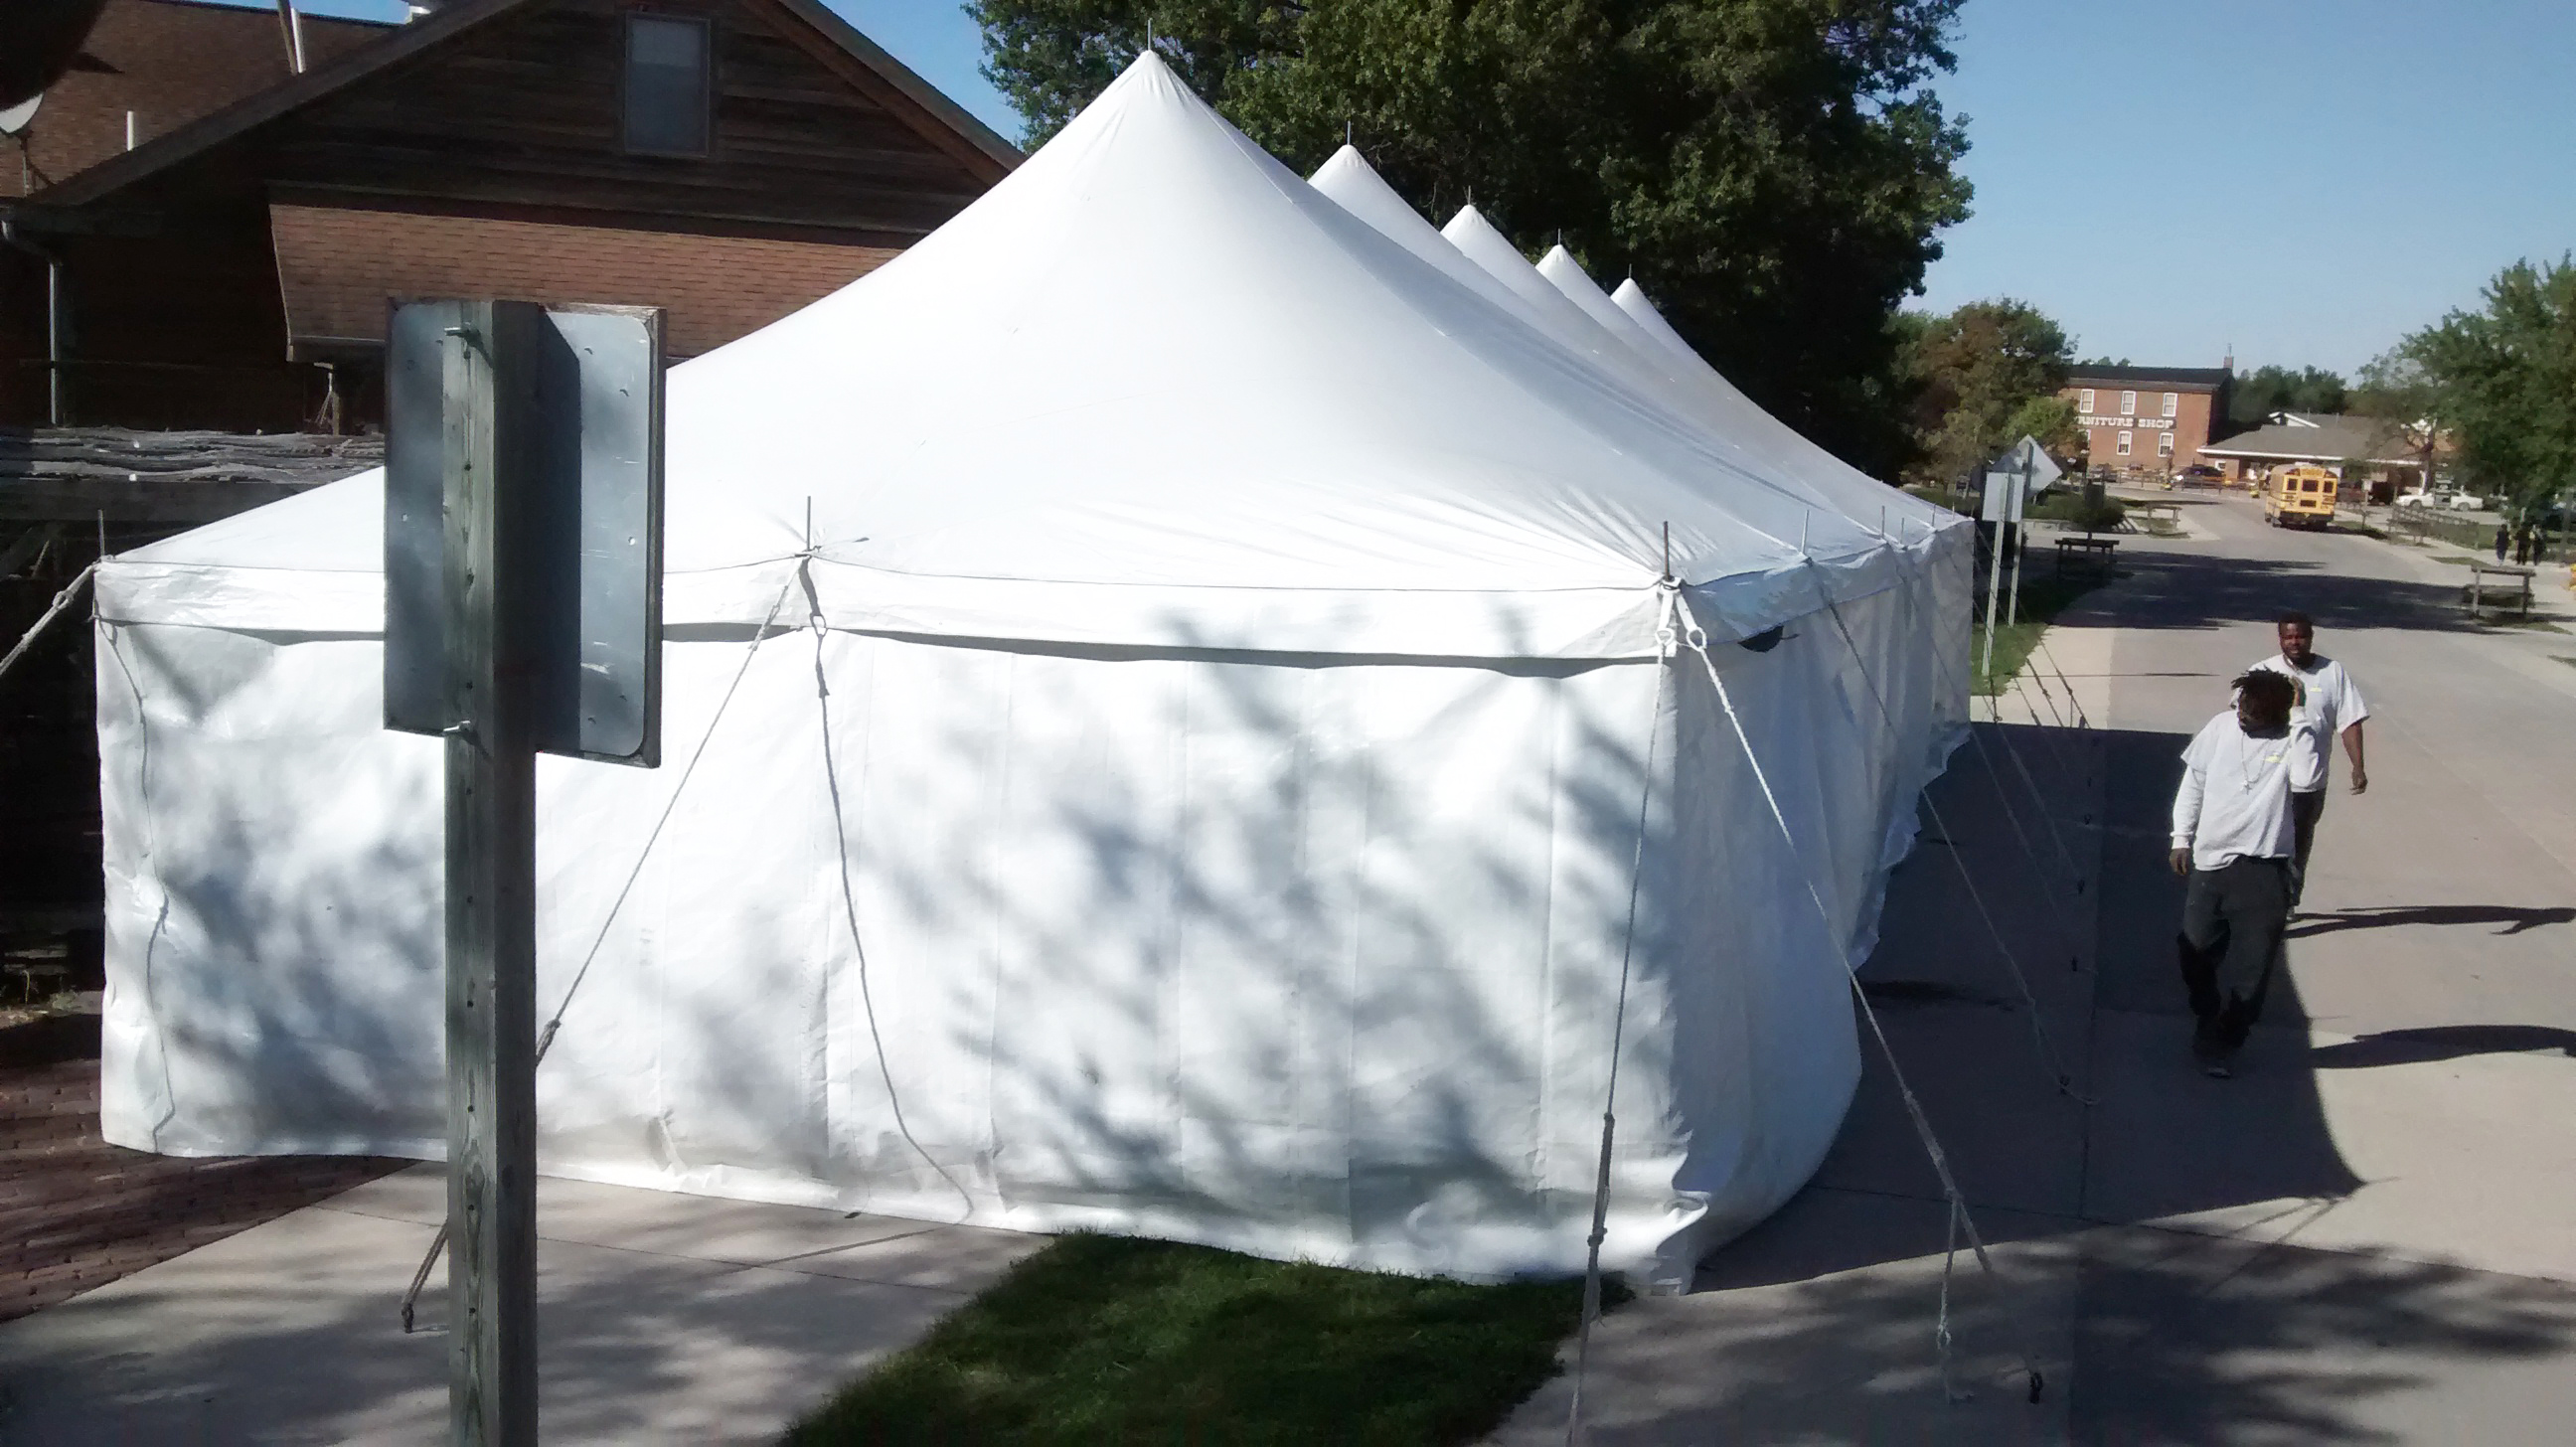 End of 20' x 60' rope and pole tent with sidewall at Millstream Brewing Company in Amana, IA with crew guys